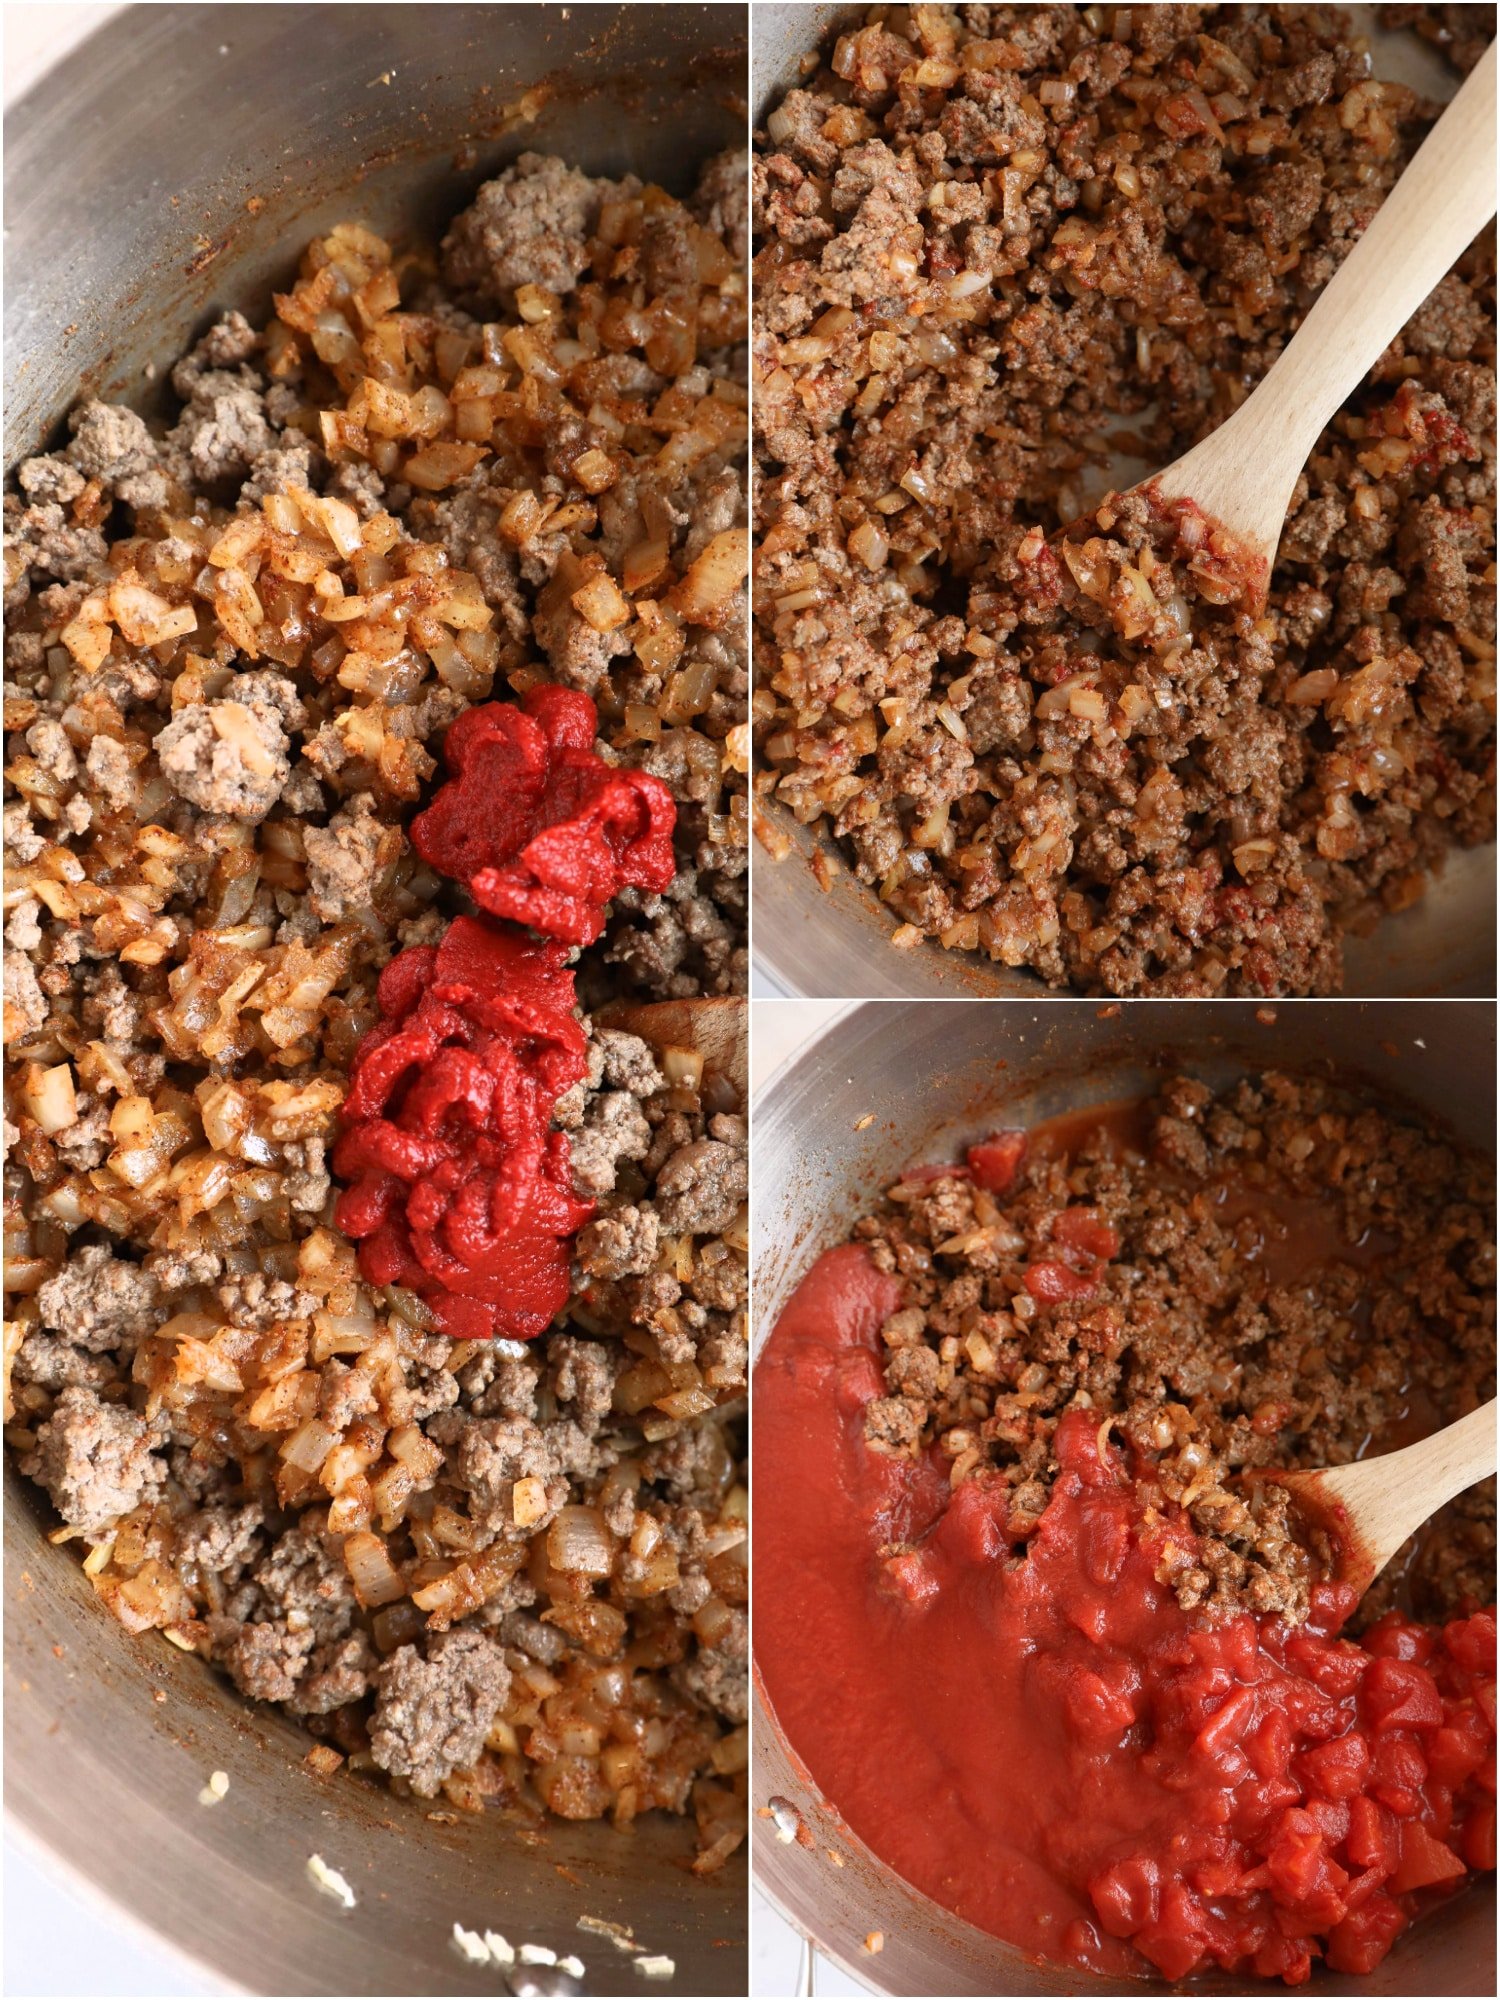 Three collages images slowing tomato paste and canned tomatoes being added to ground beef and onions.